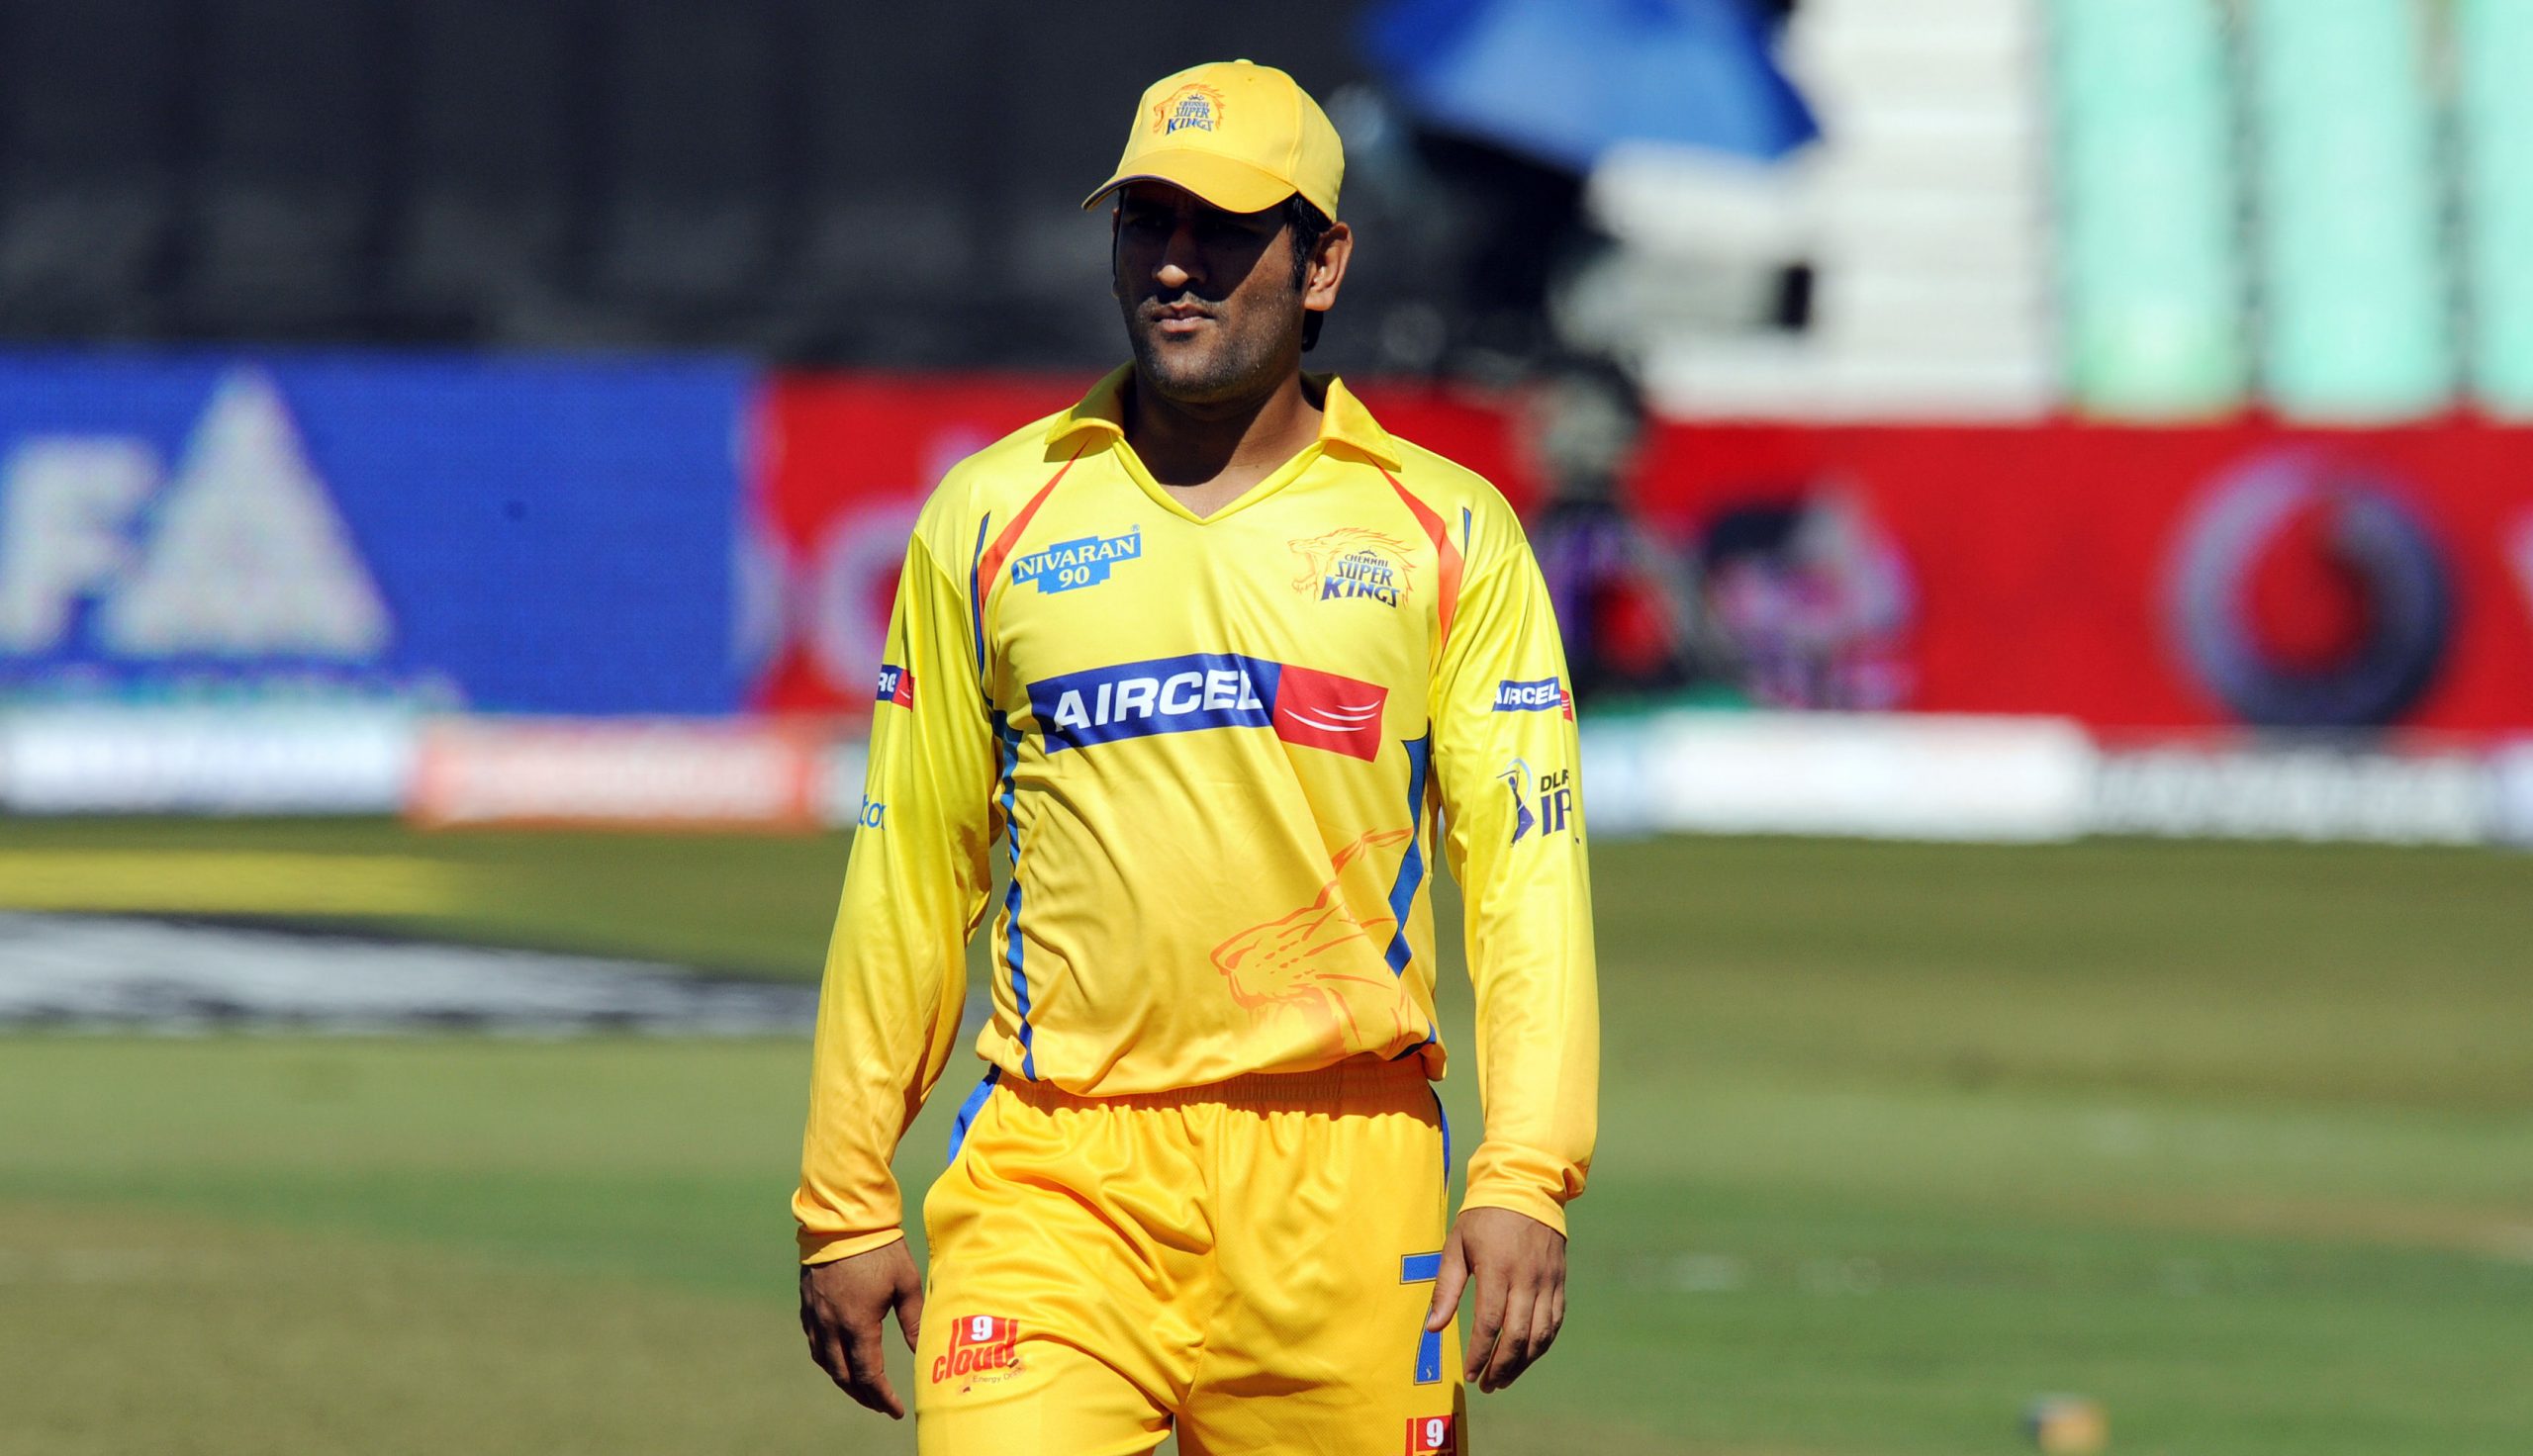 IPL 2021: ‘Poor execution’ from bowlers, says MS Dhoni after Delhi glides over CSK